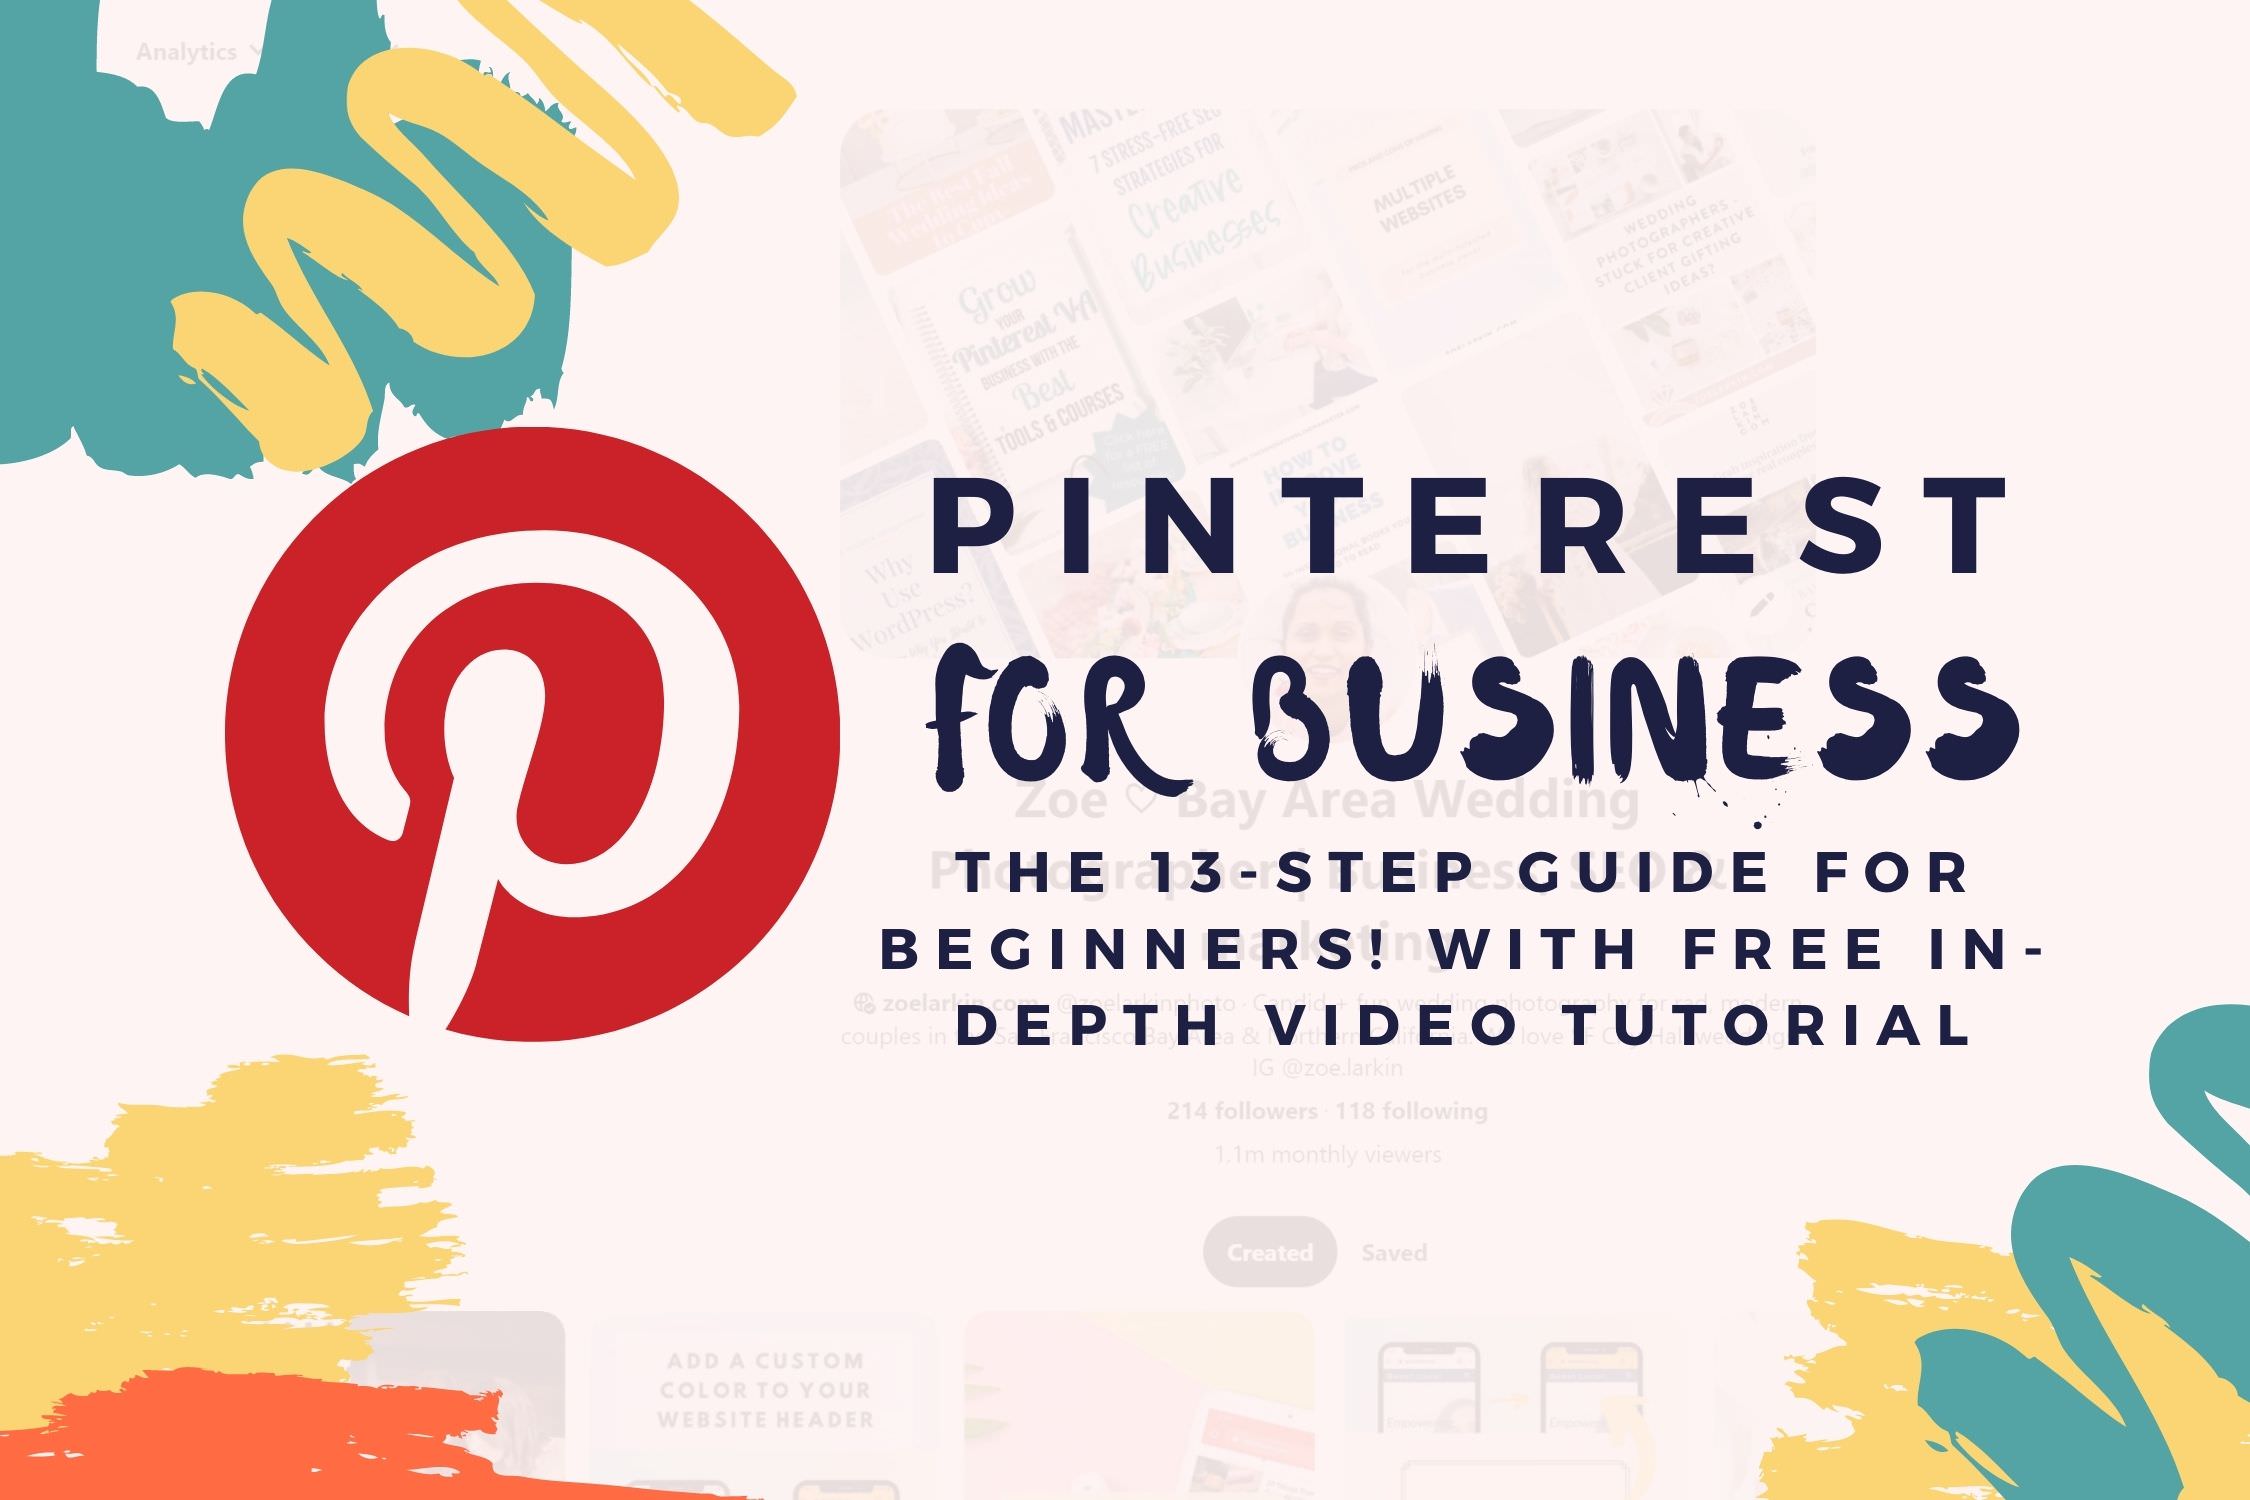 Everything you need to know about using Pinterest for your small business by Zoe Larkin